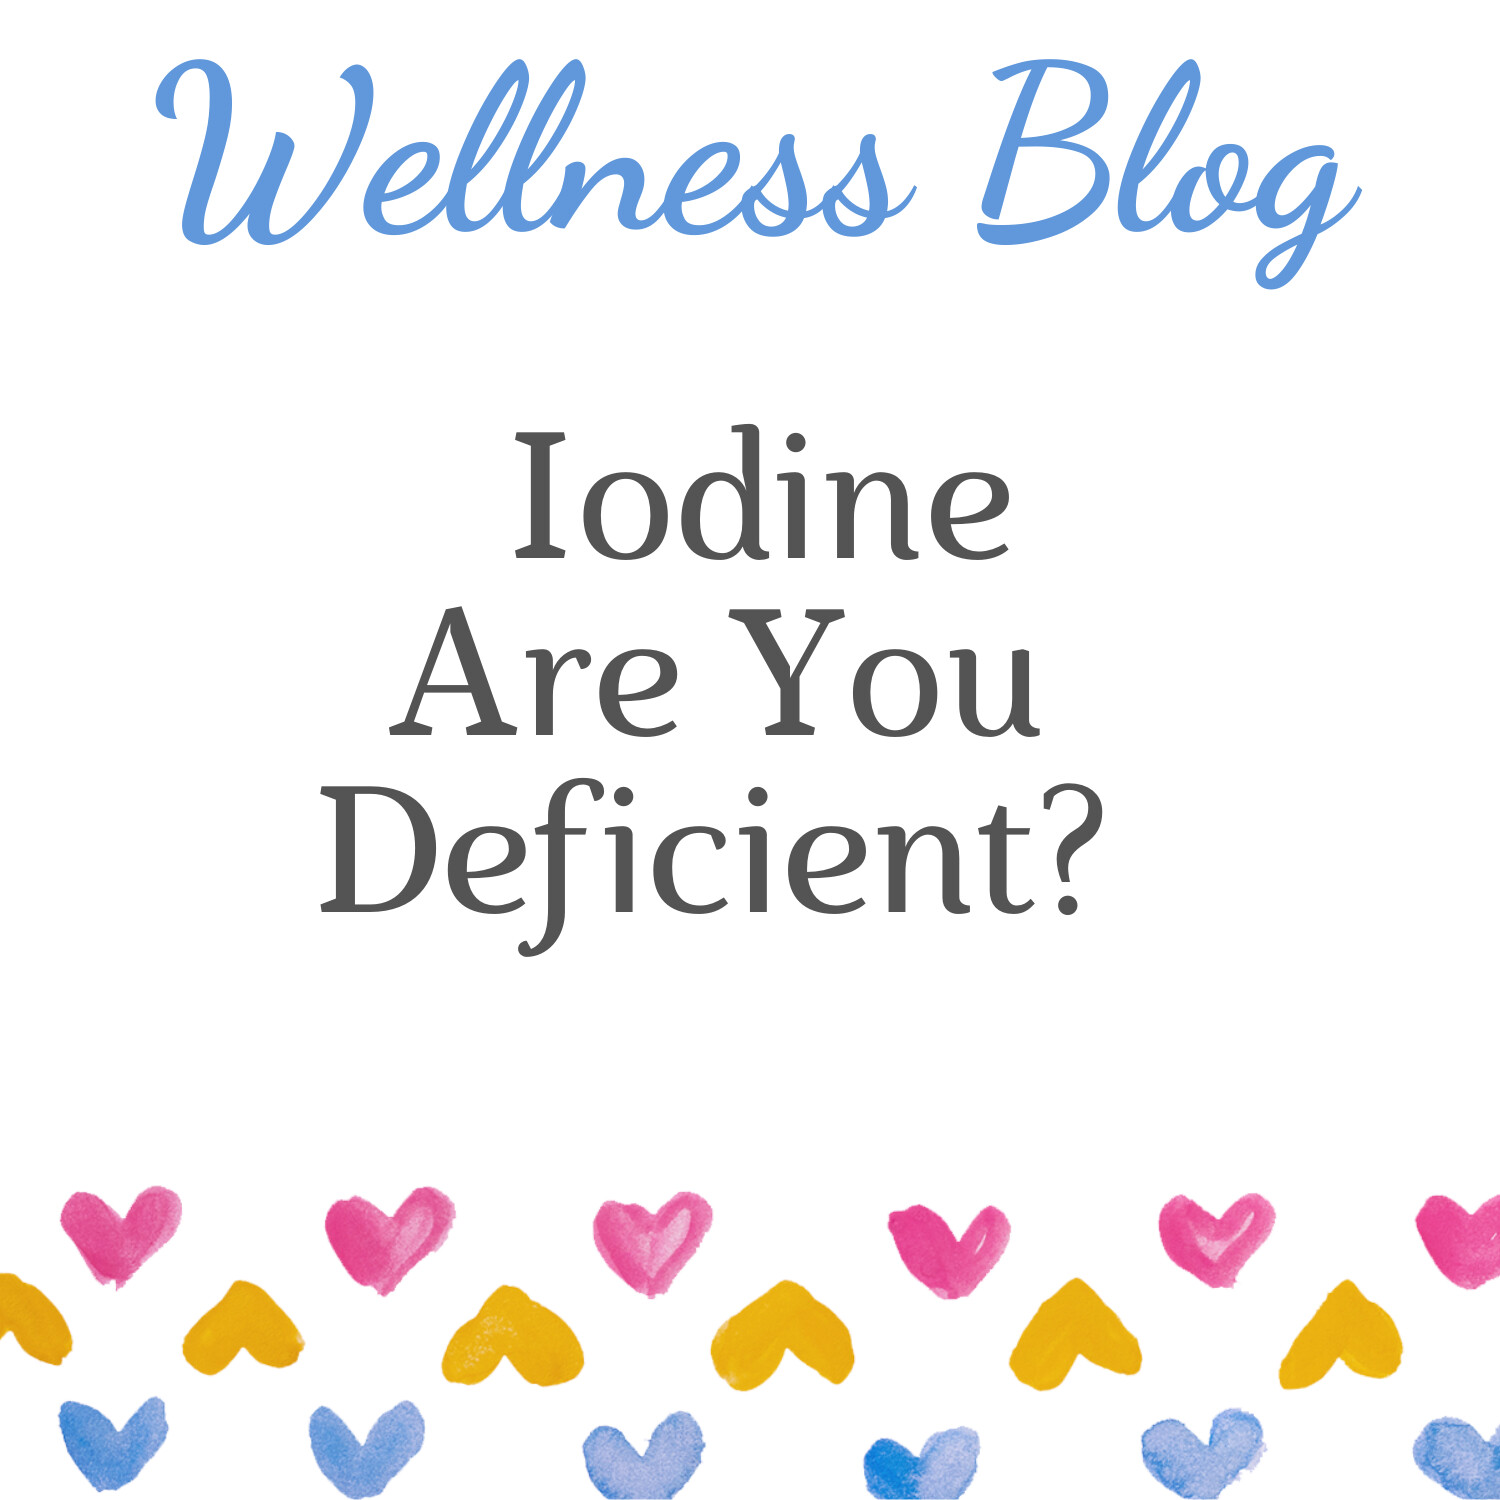 Iodine - Are You Deficient? 